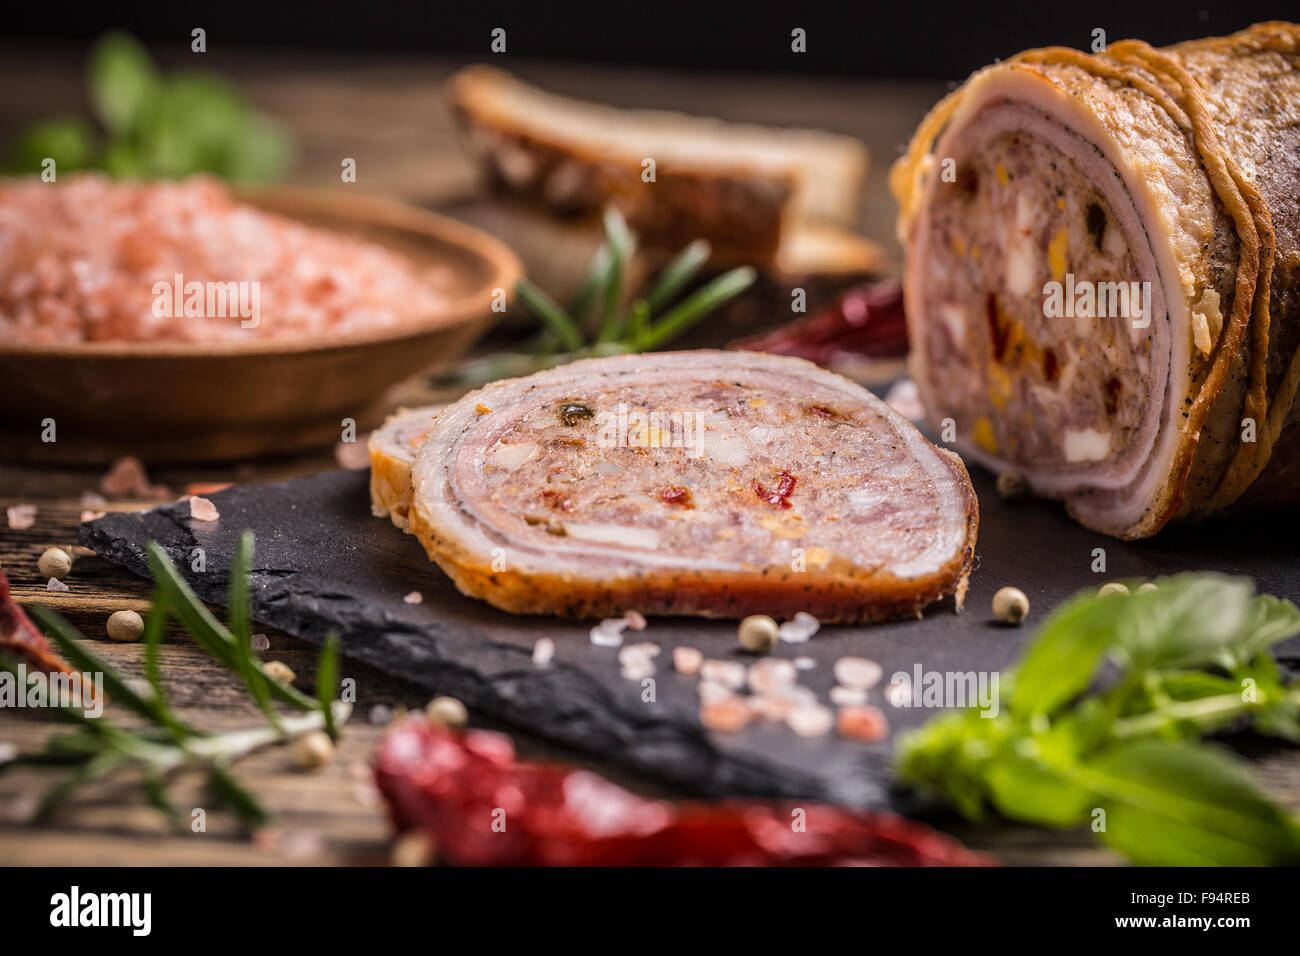 Pork roll filled with minced meat and eggs Stock Photo